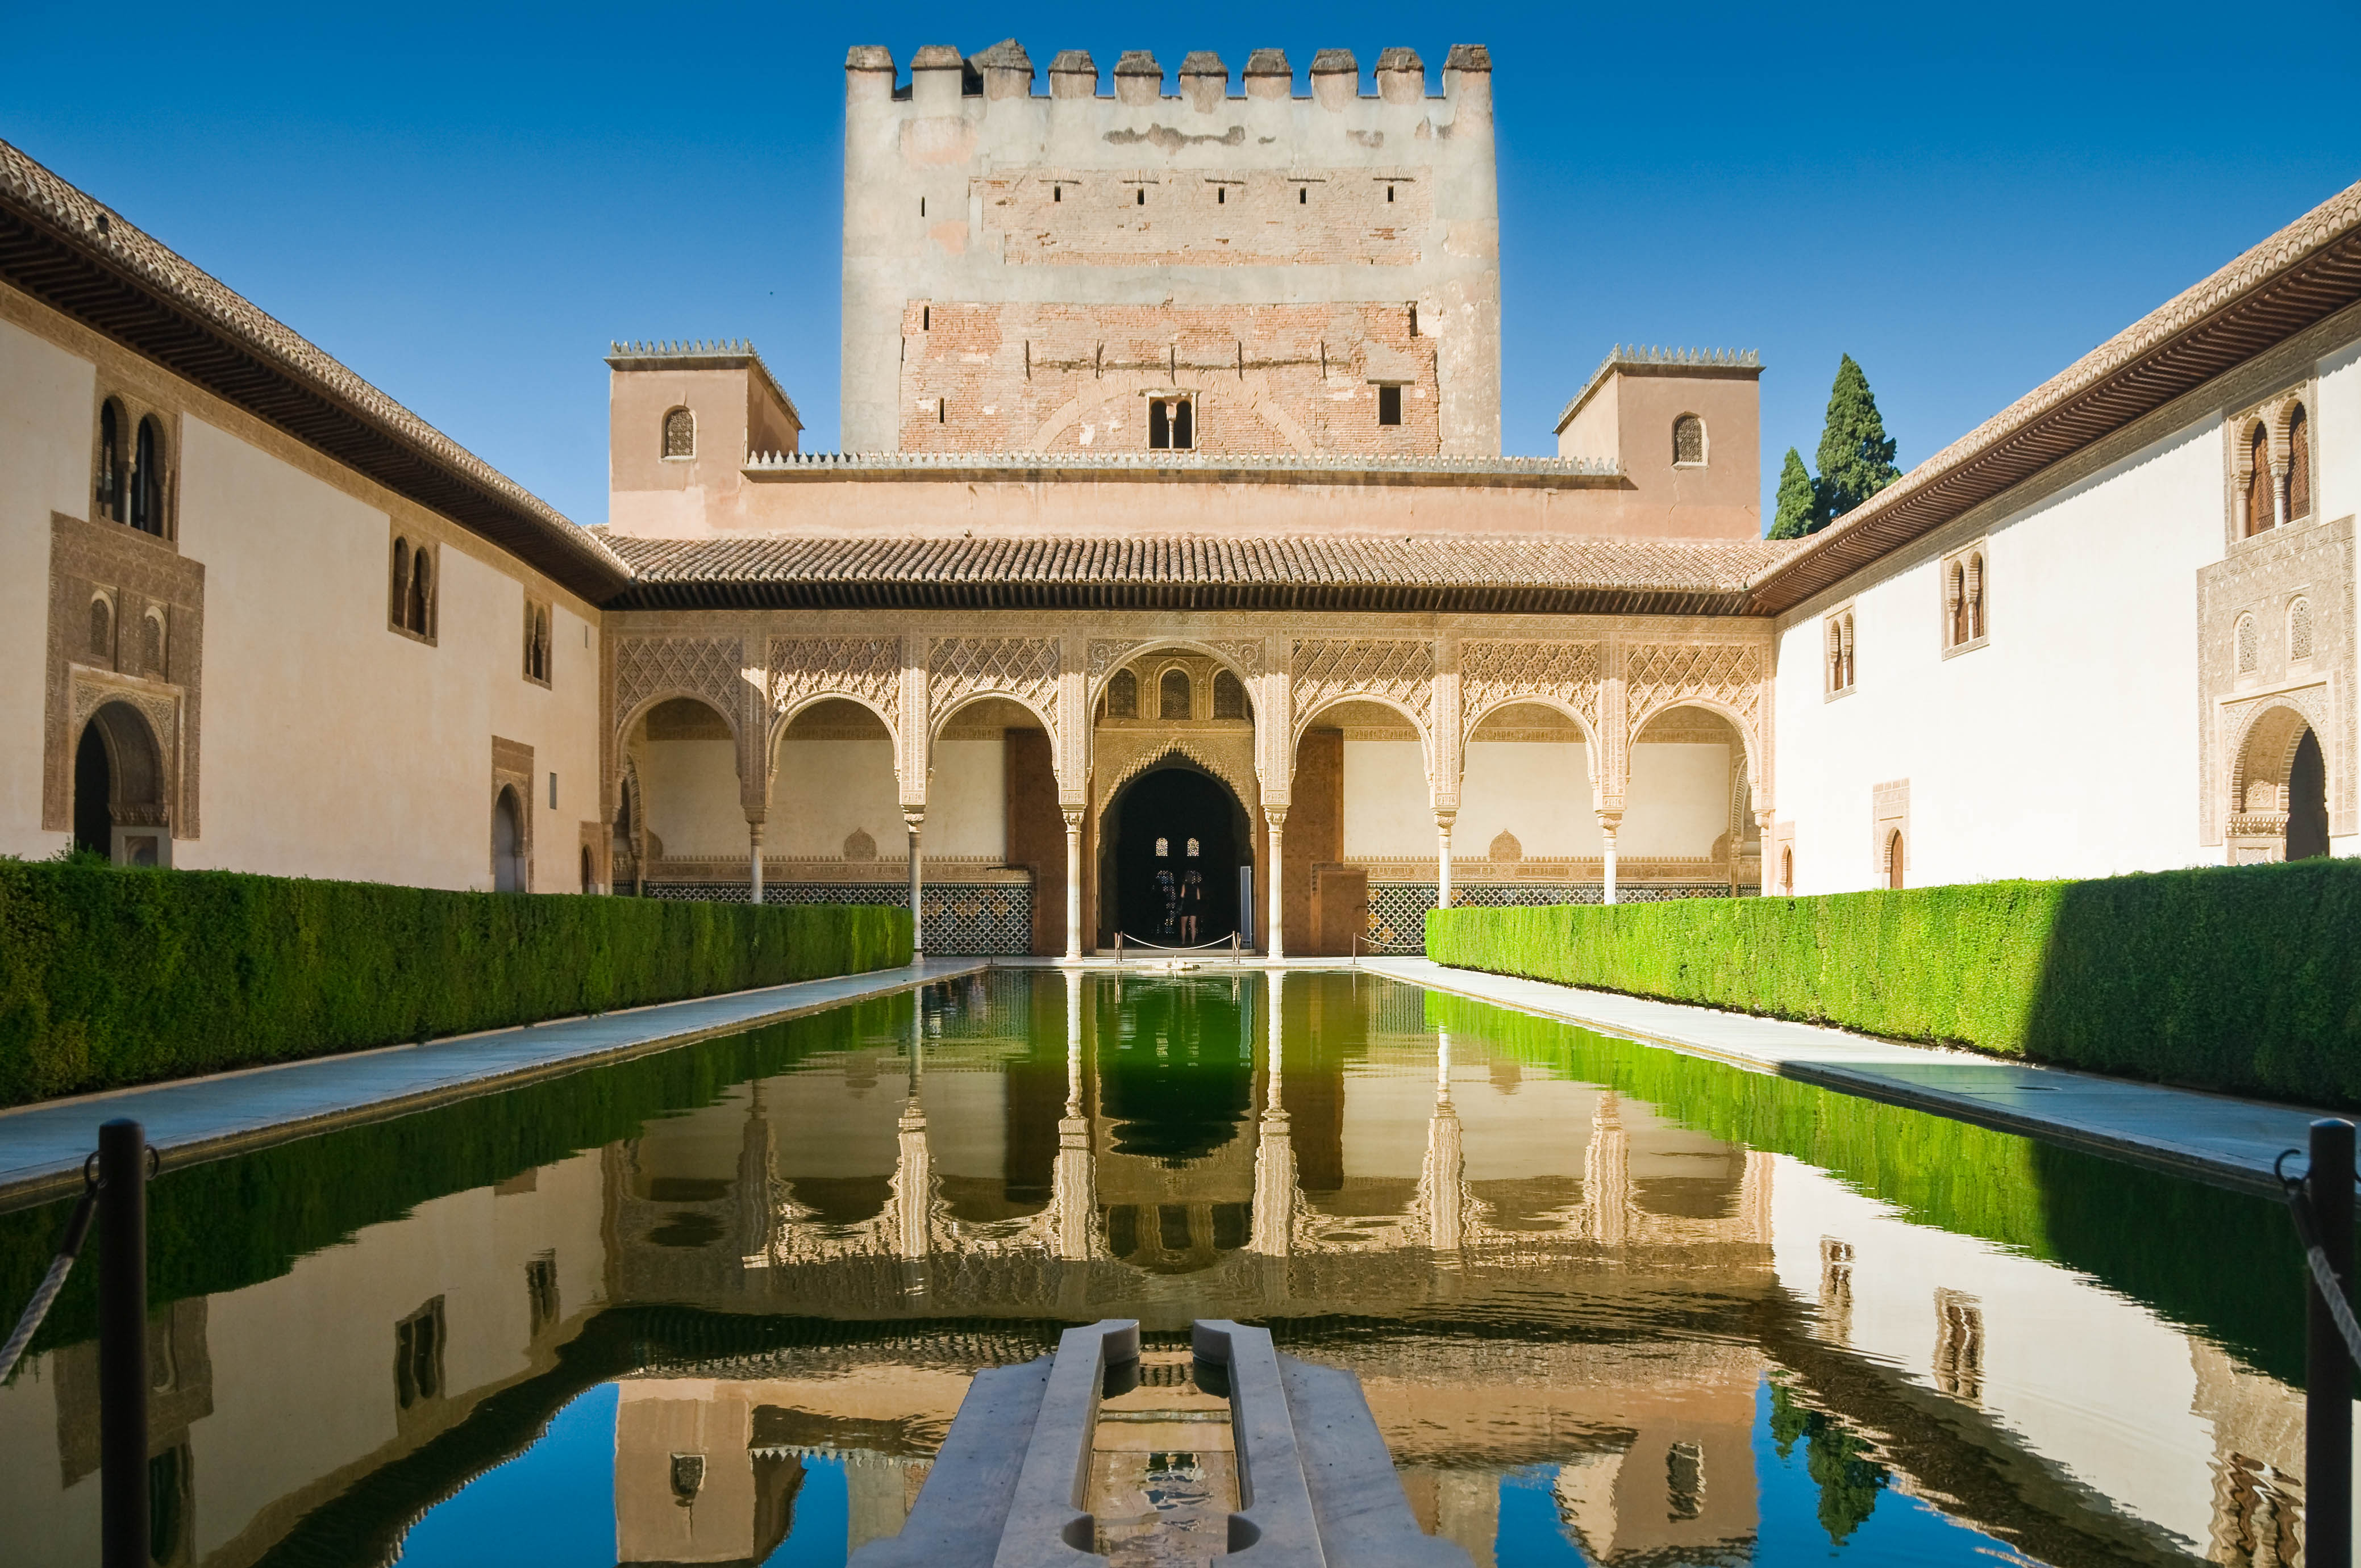 Palacios Nazaries, a part of the Alhambra in Granada, Spain. Reflection in water.